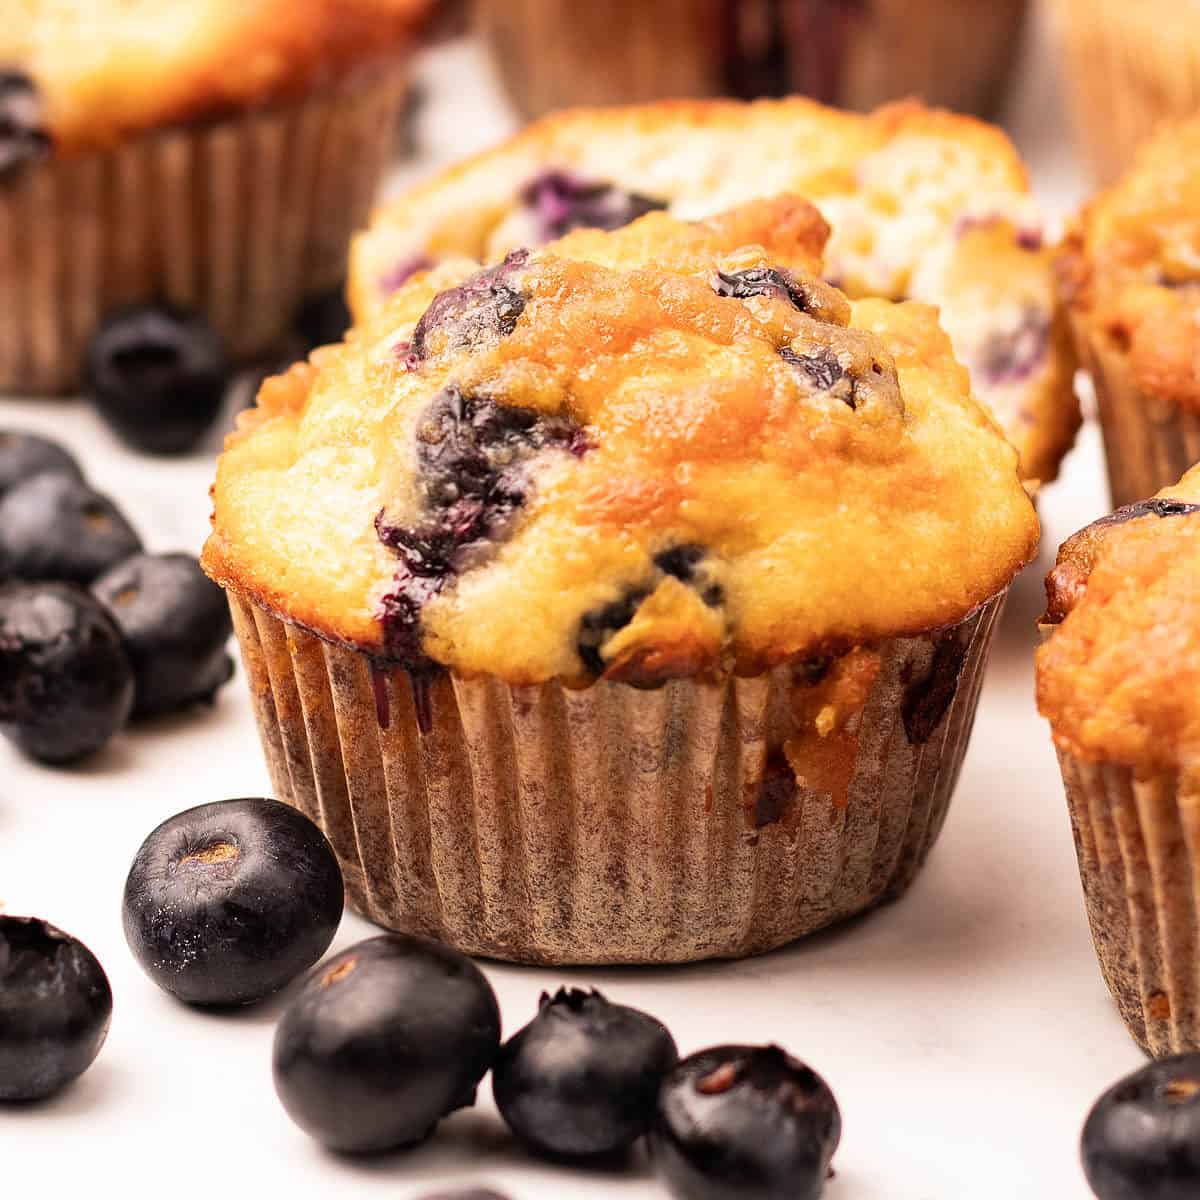 Blueberry Protein Muffin Tops